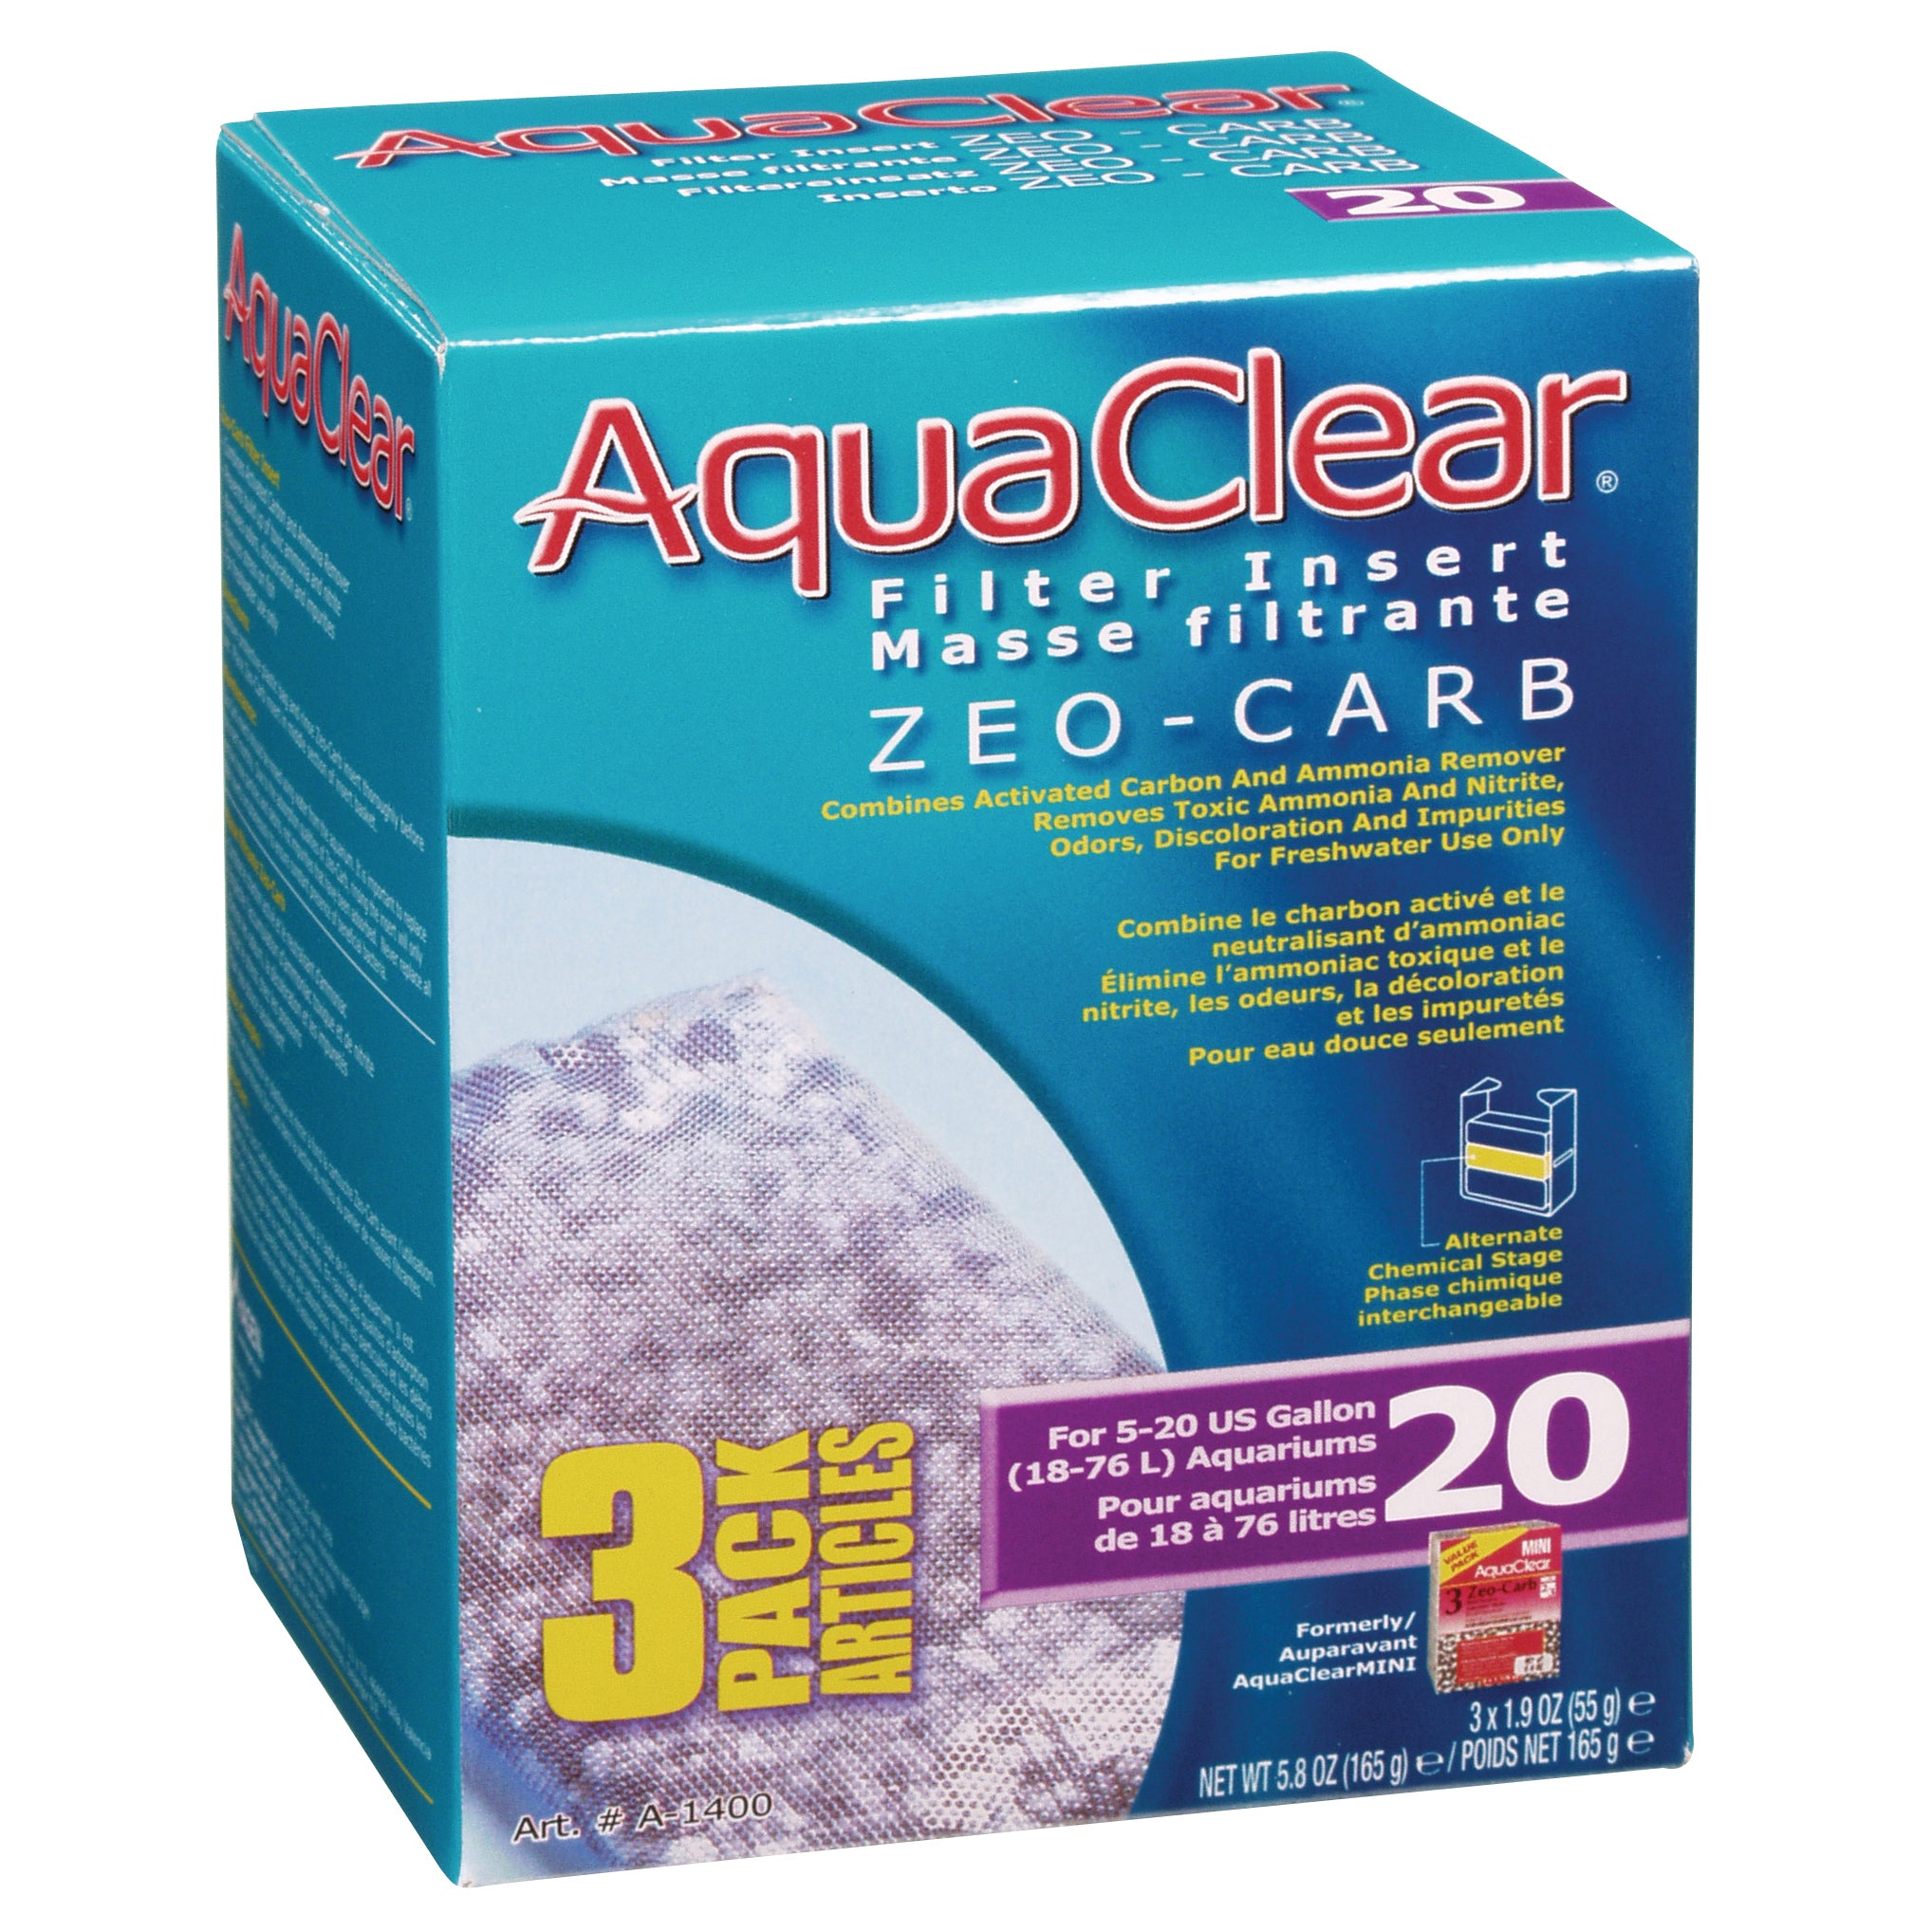 AquaClear Zeo-Carb Filter Insert (3-Pack)